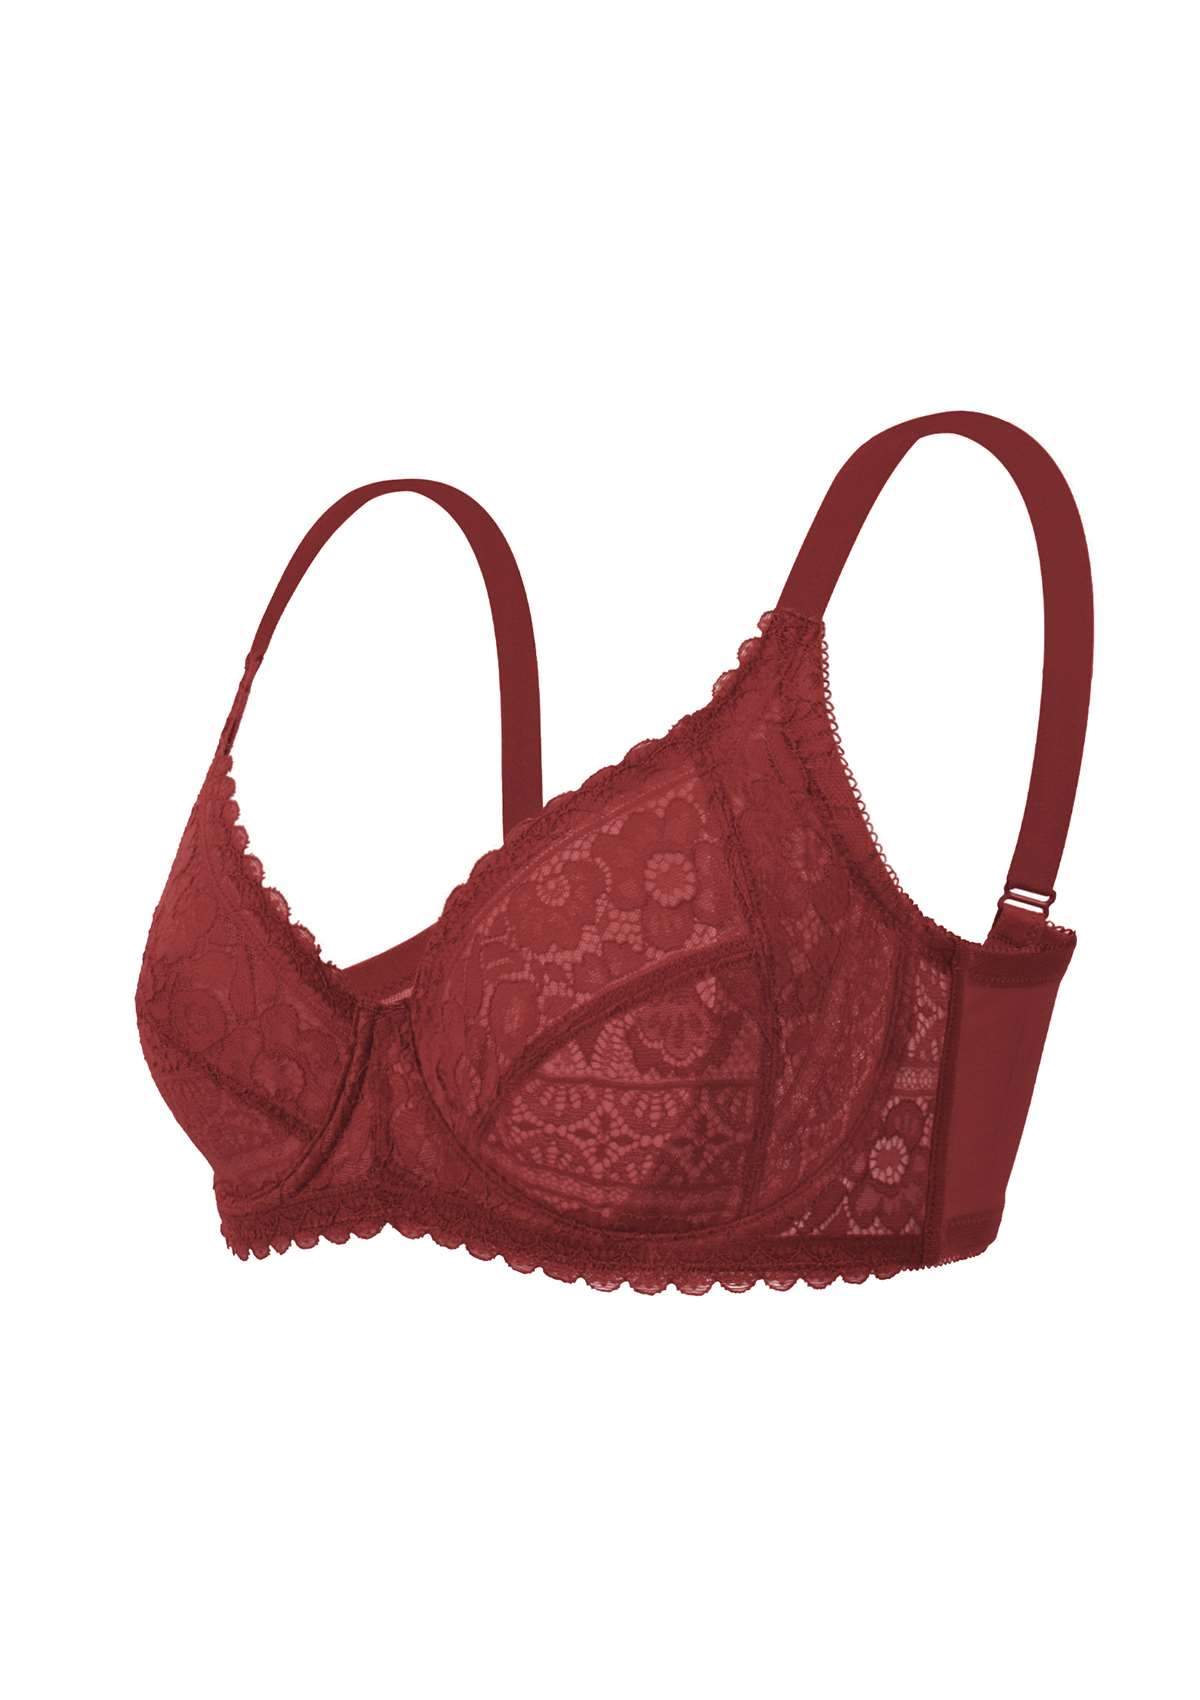 HSIA Freesia Unlined Lace Bra: Bra That Supports Back - Red / 40 / D